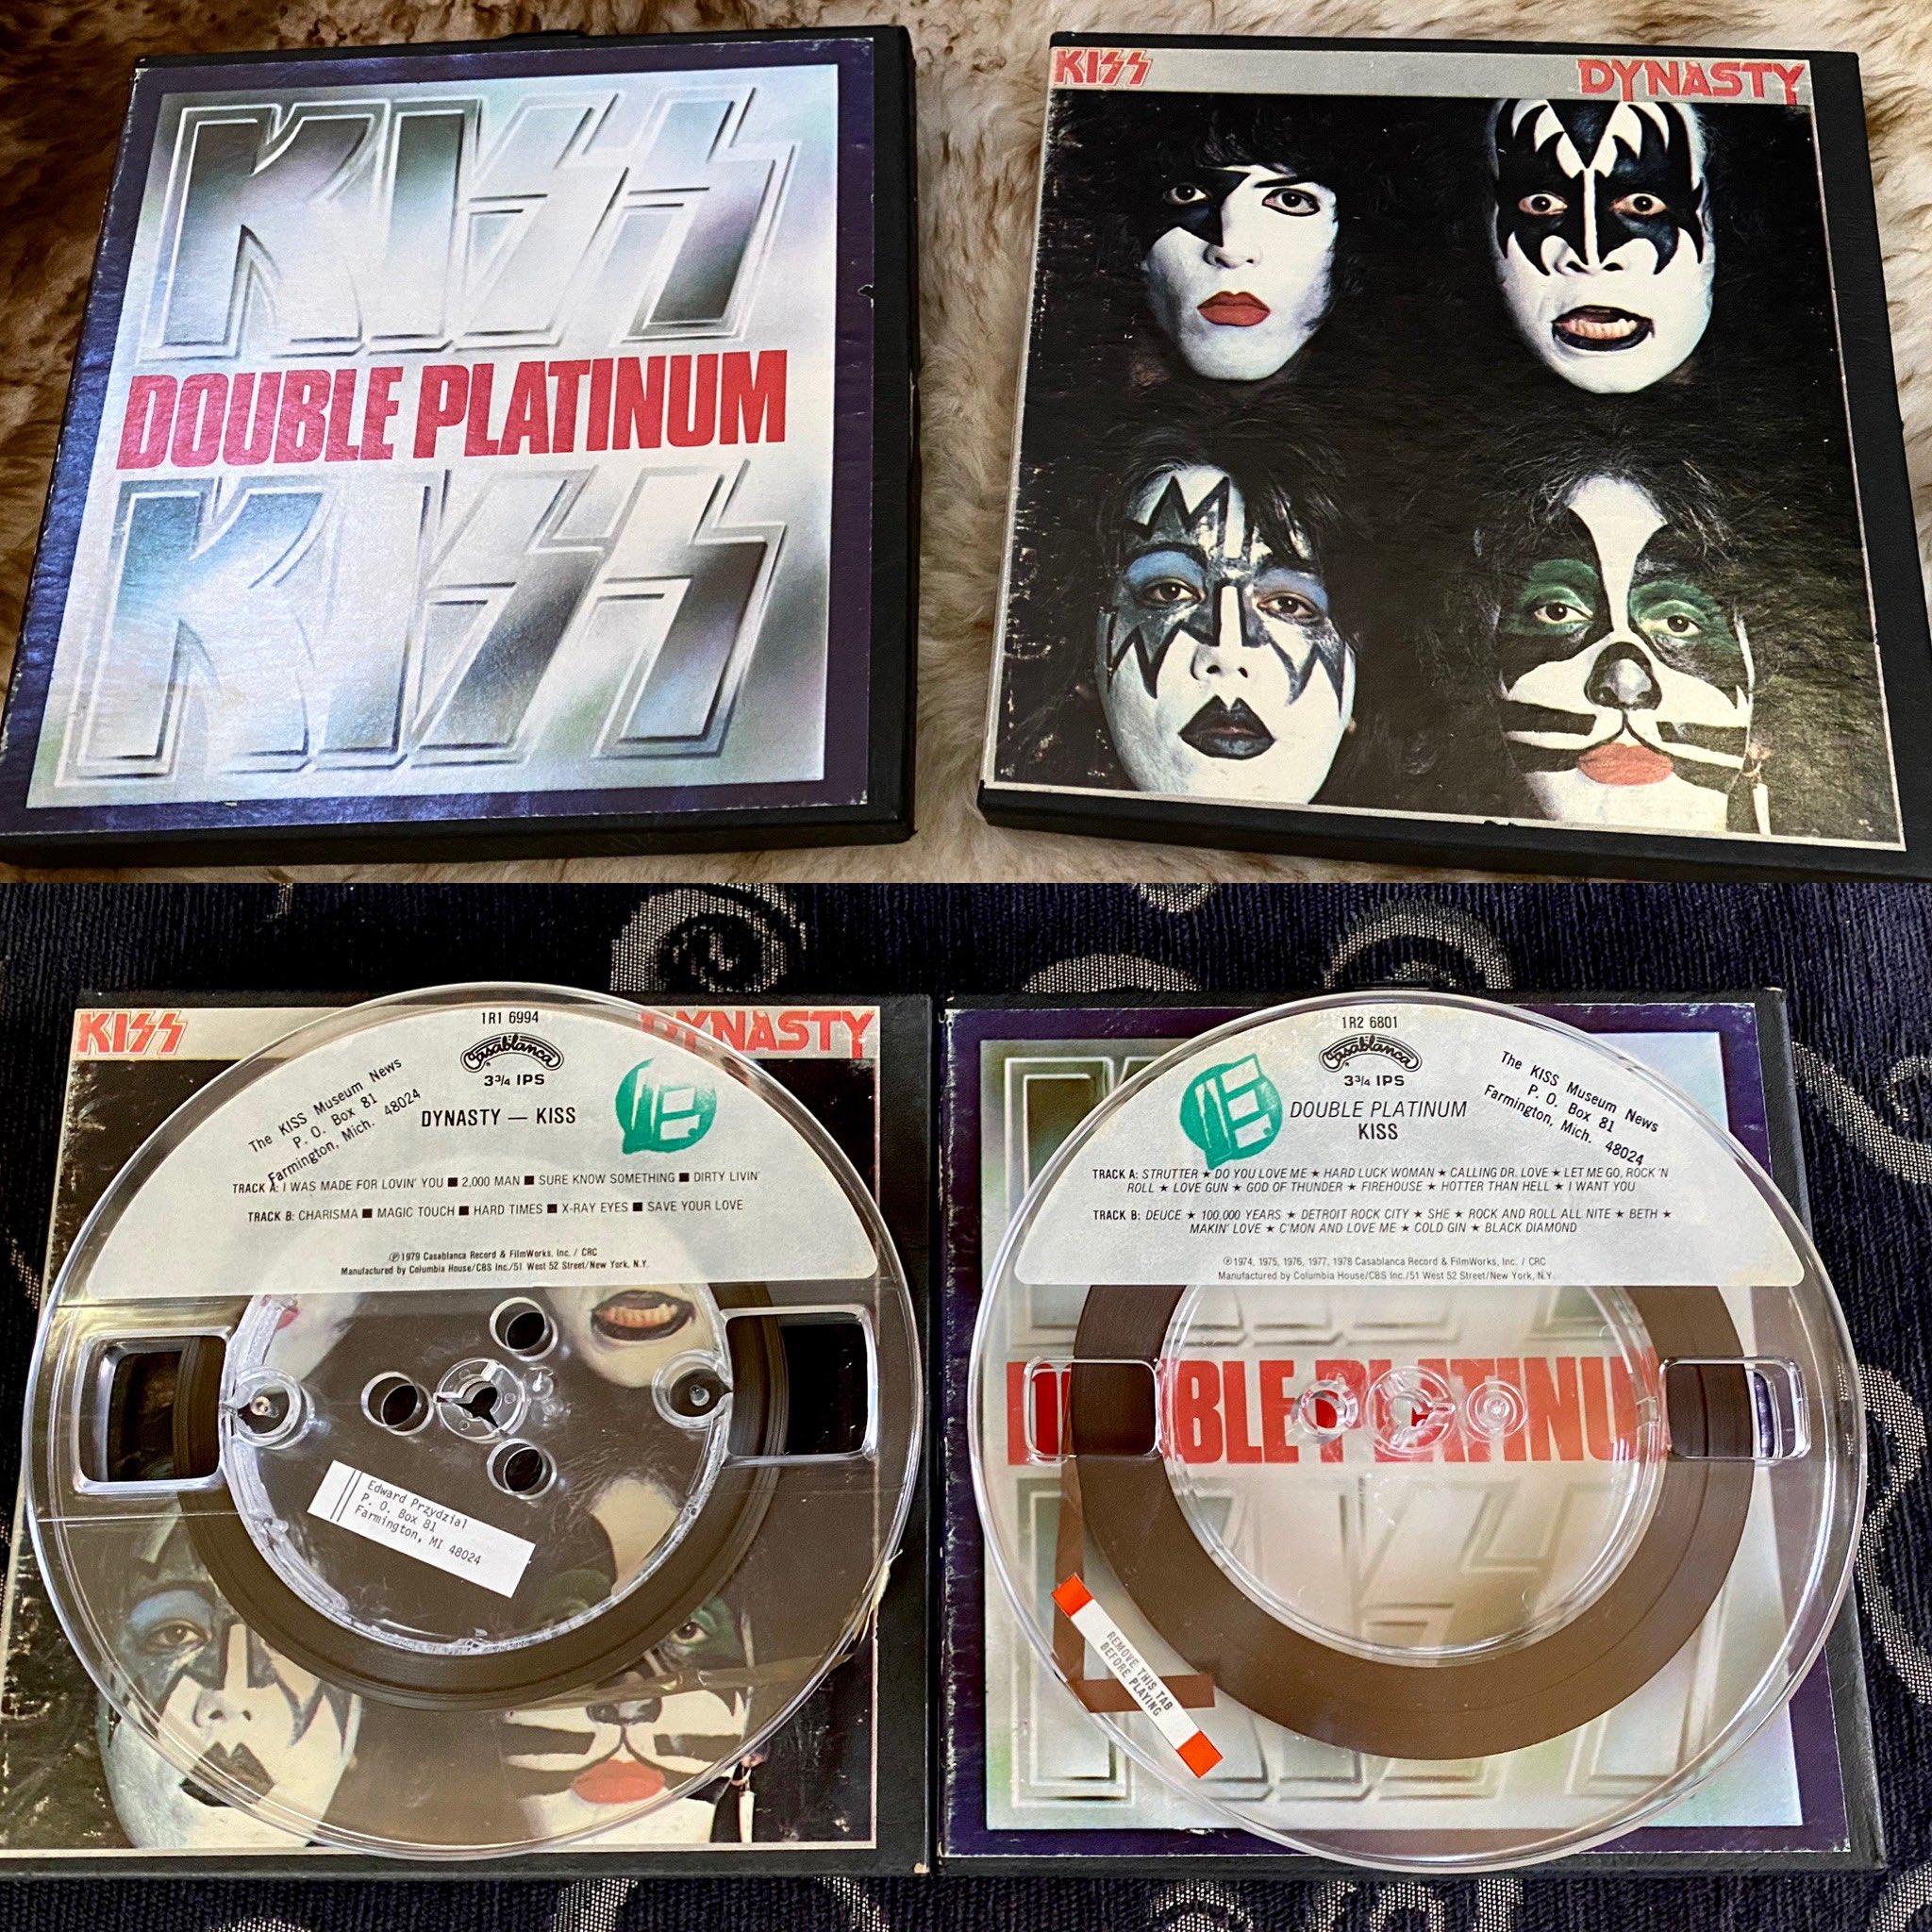 Bruce Kulick on X: KKKK #29 -Vintage KISS Reel to Reel 7” Tapes - I love tape  recorders and I still own a few vintage reel to reel tape machines. I've  collected